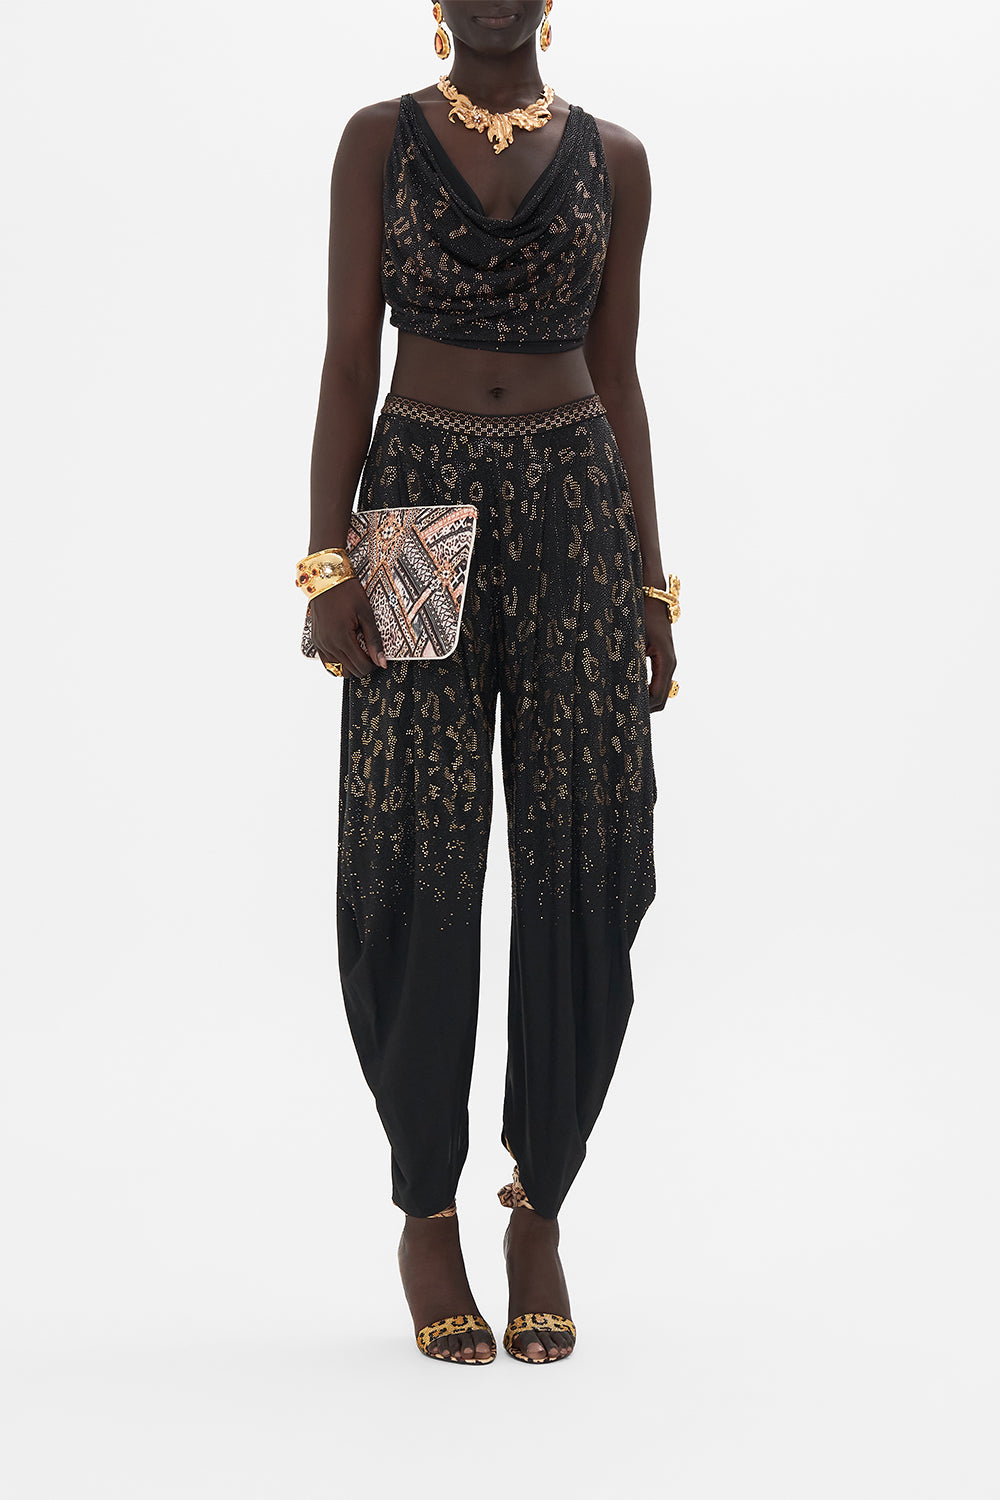 Front view of model wearing CAMILLA black jersey pants in Mosaic Muse print